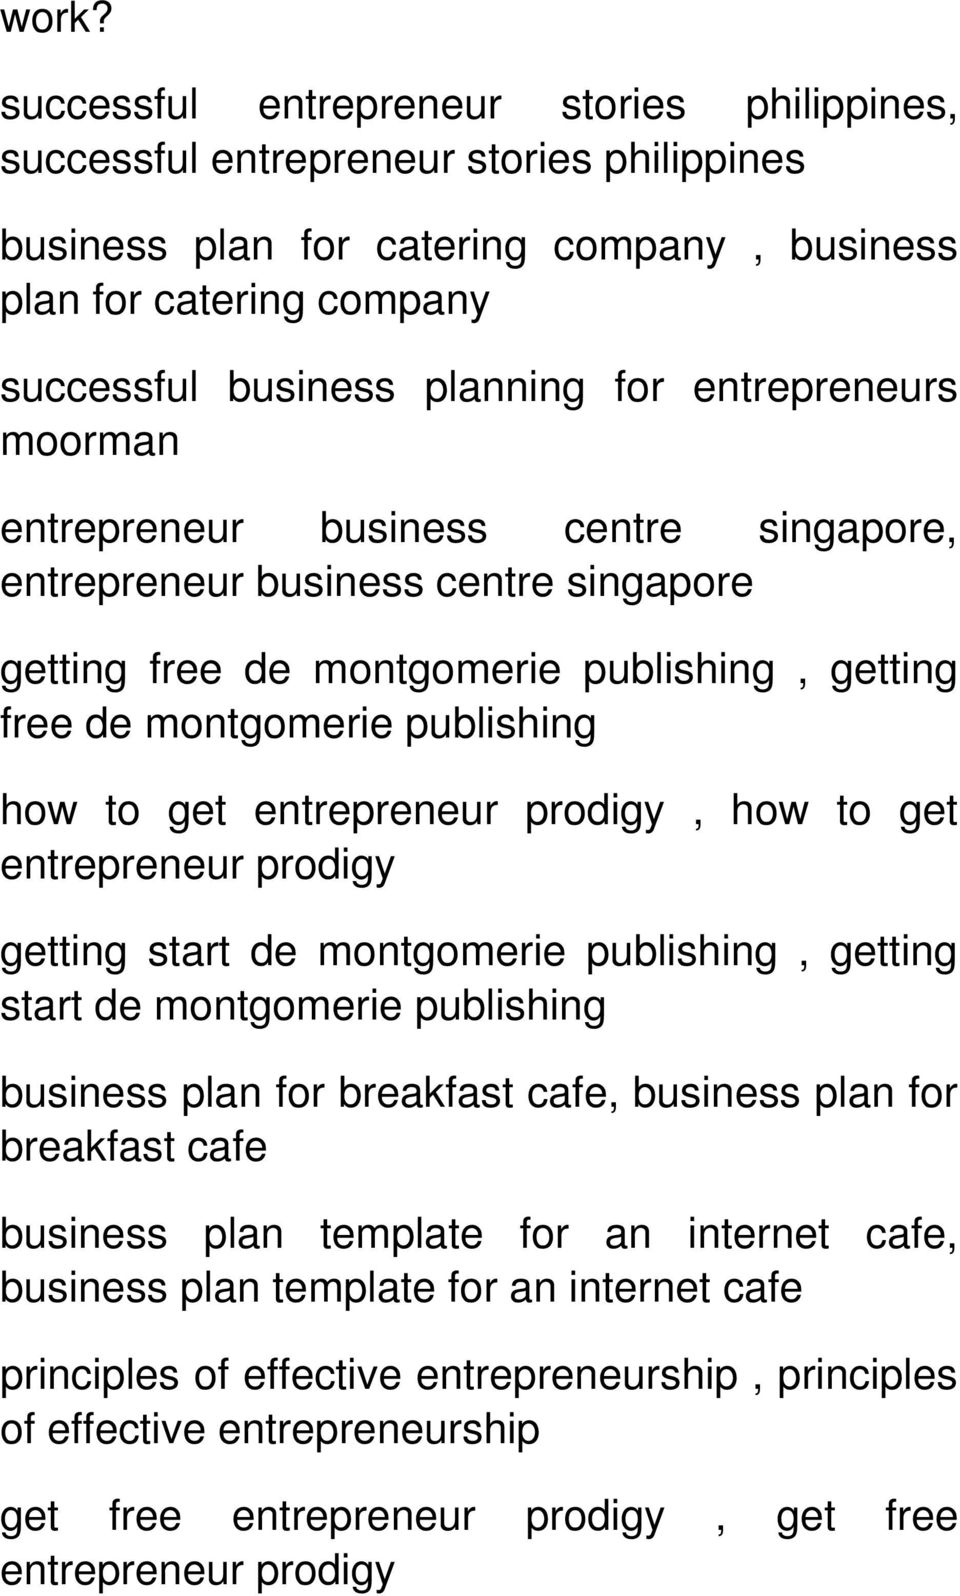 internet cafe business plan in india pdf download